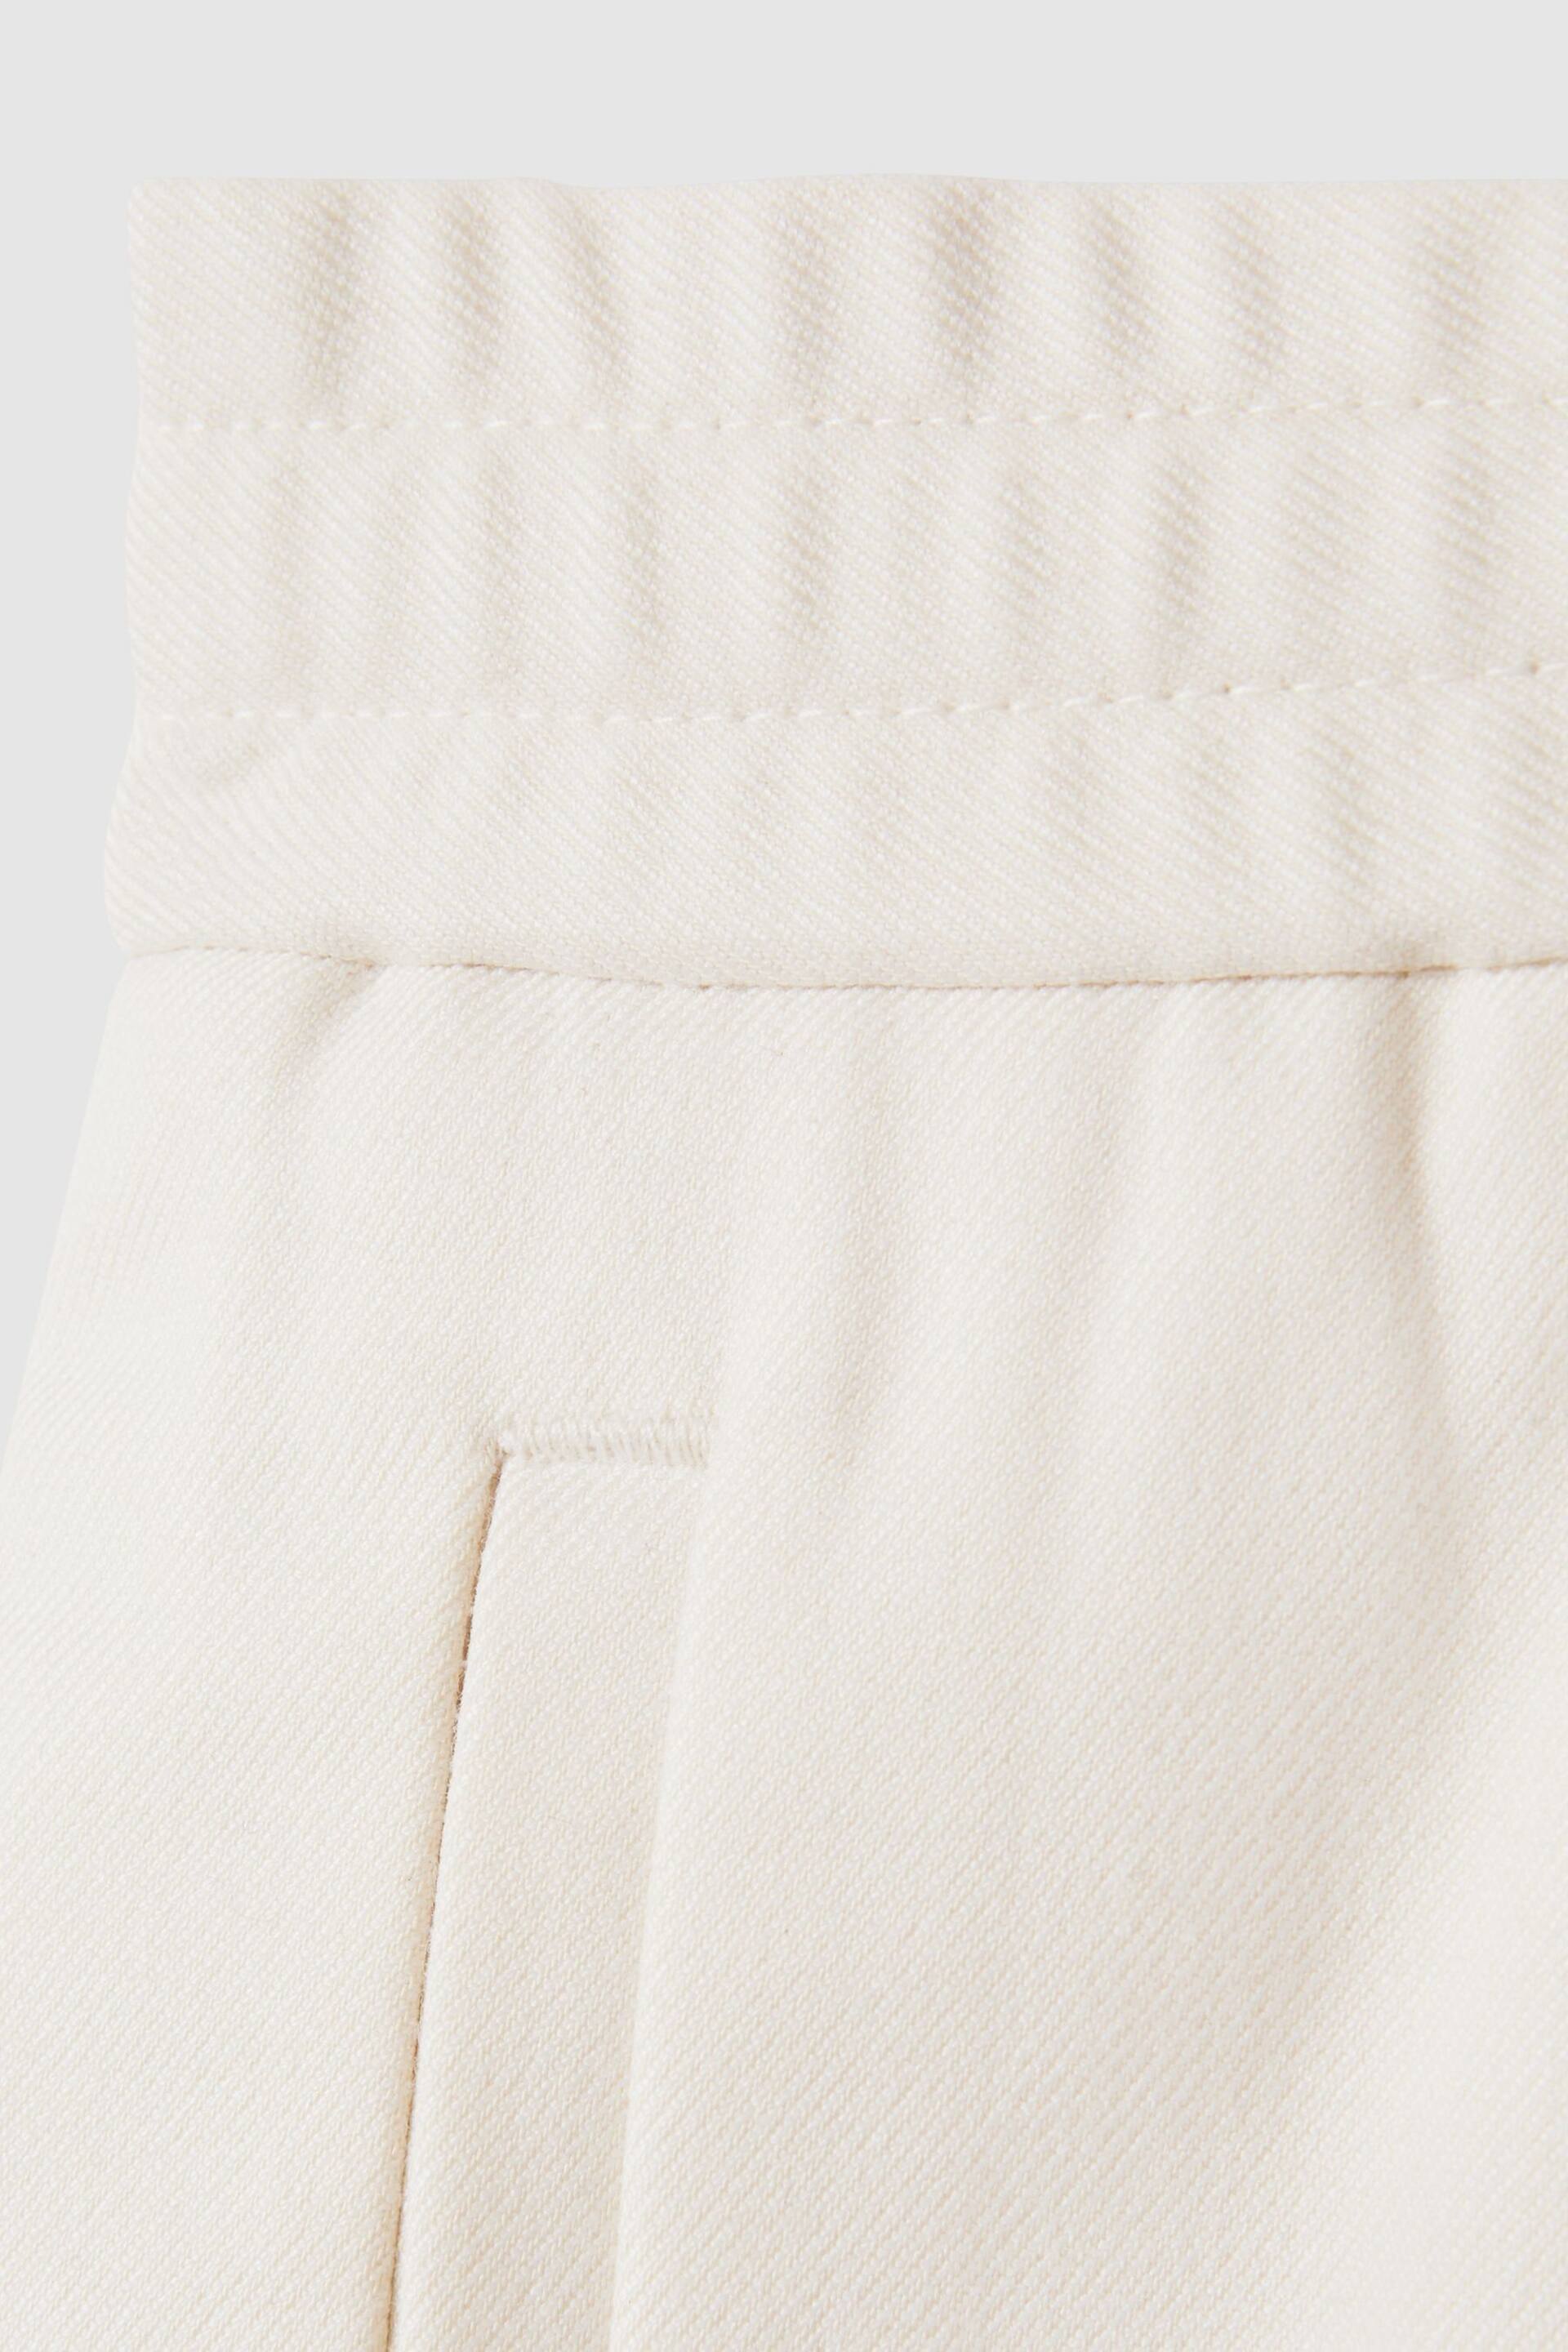 Reiss White Sussex Relaxed Drawstring Shorts - Image 6 of 6